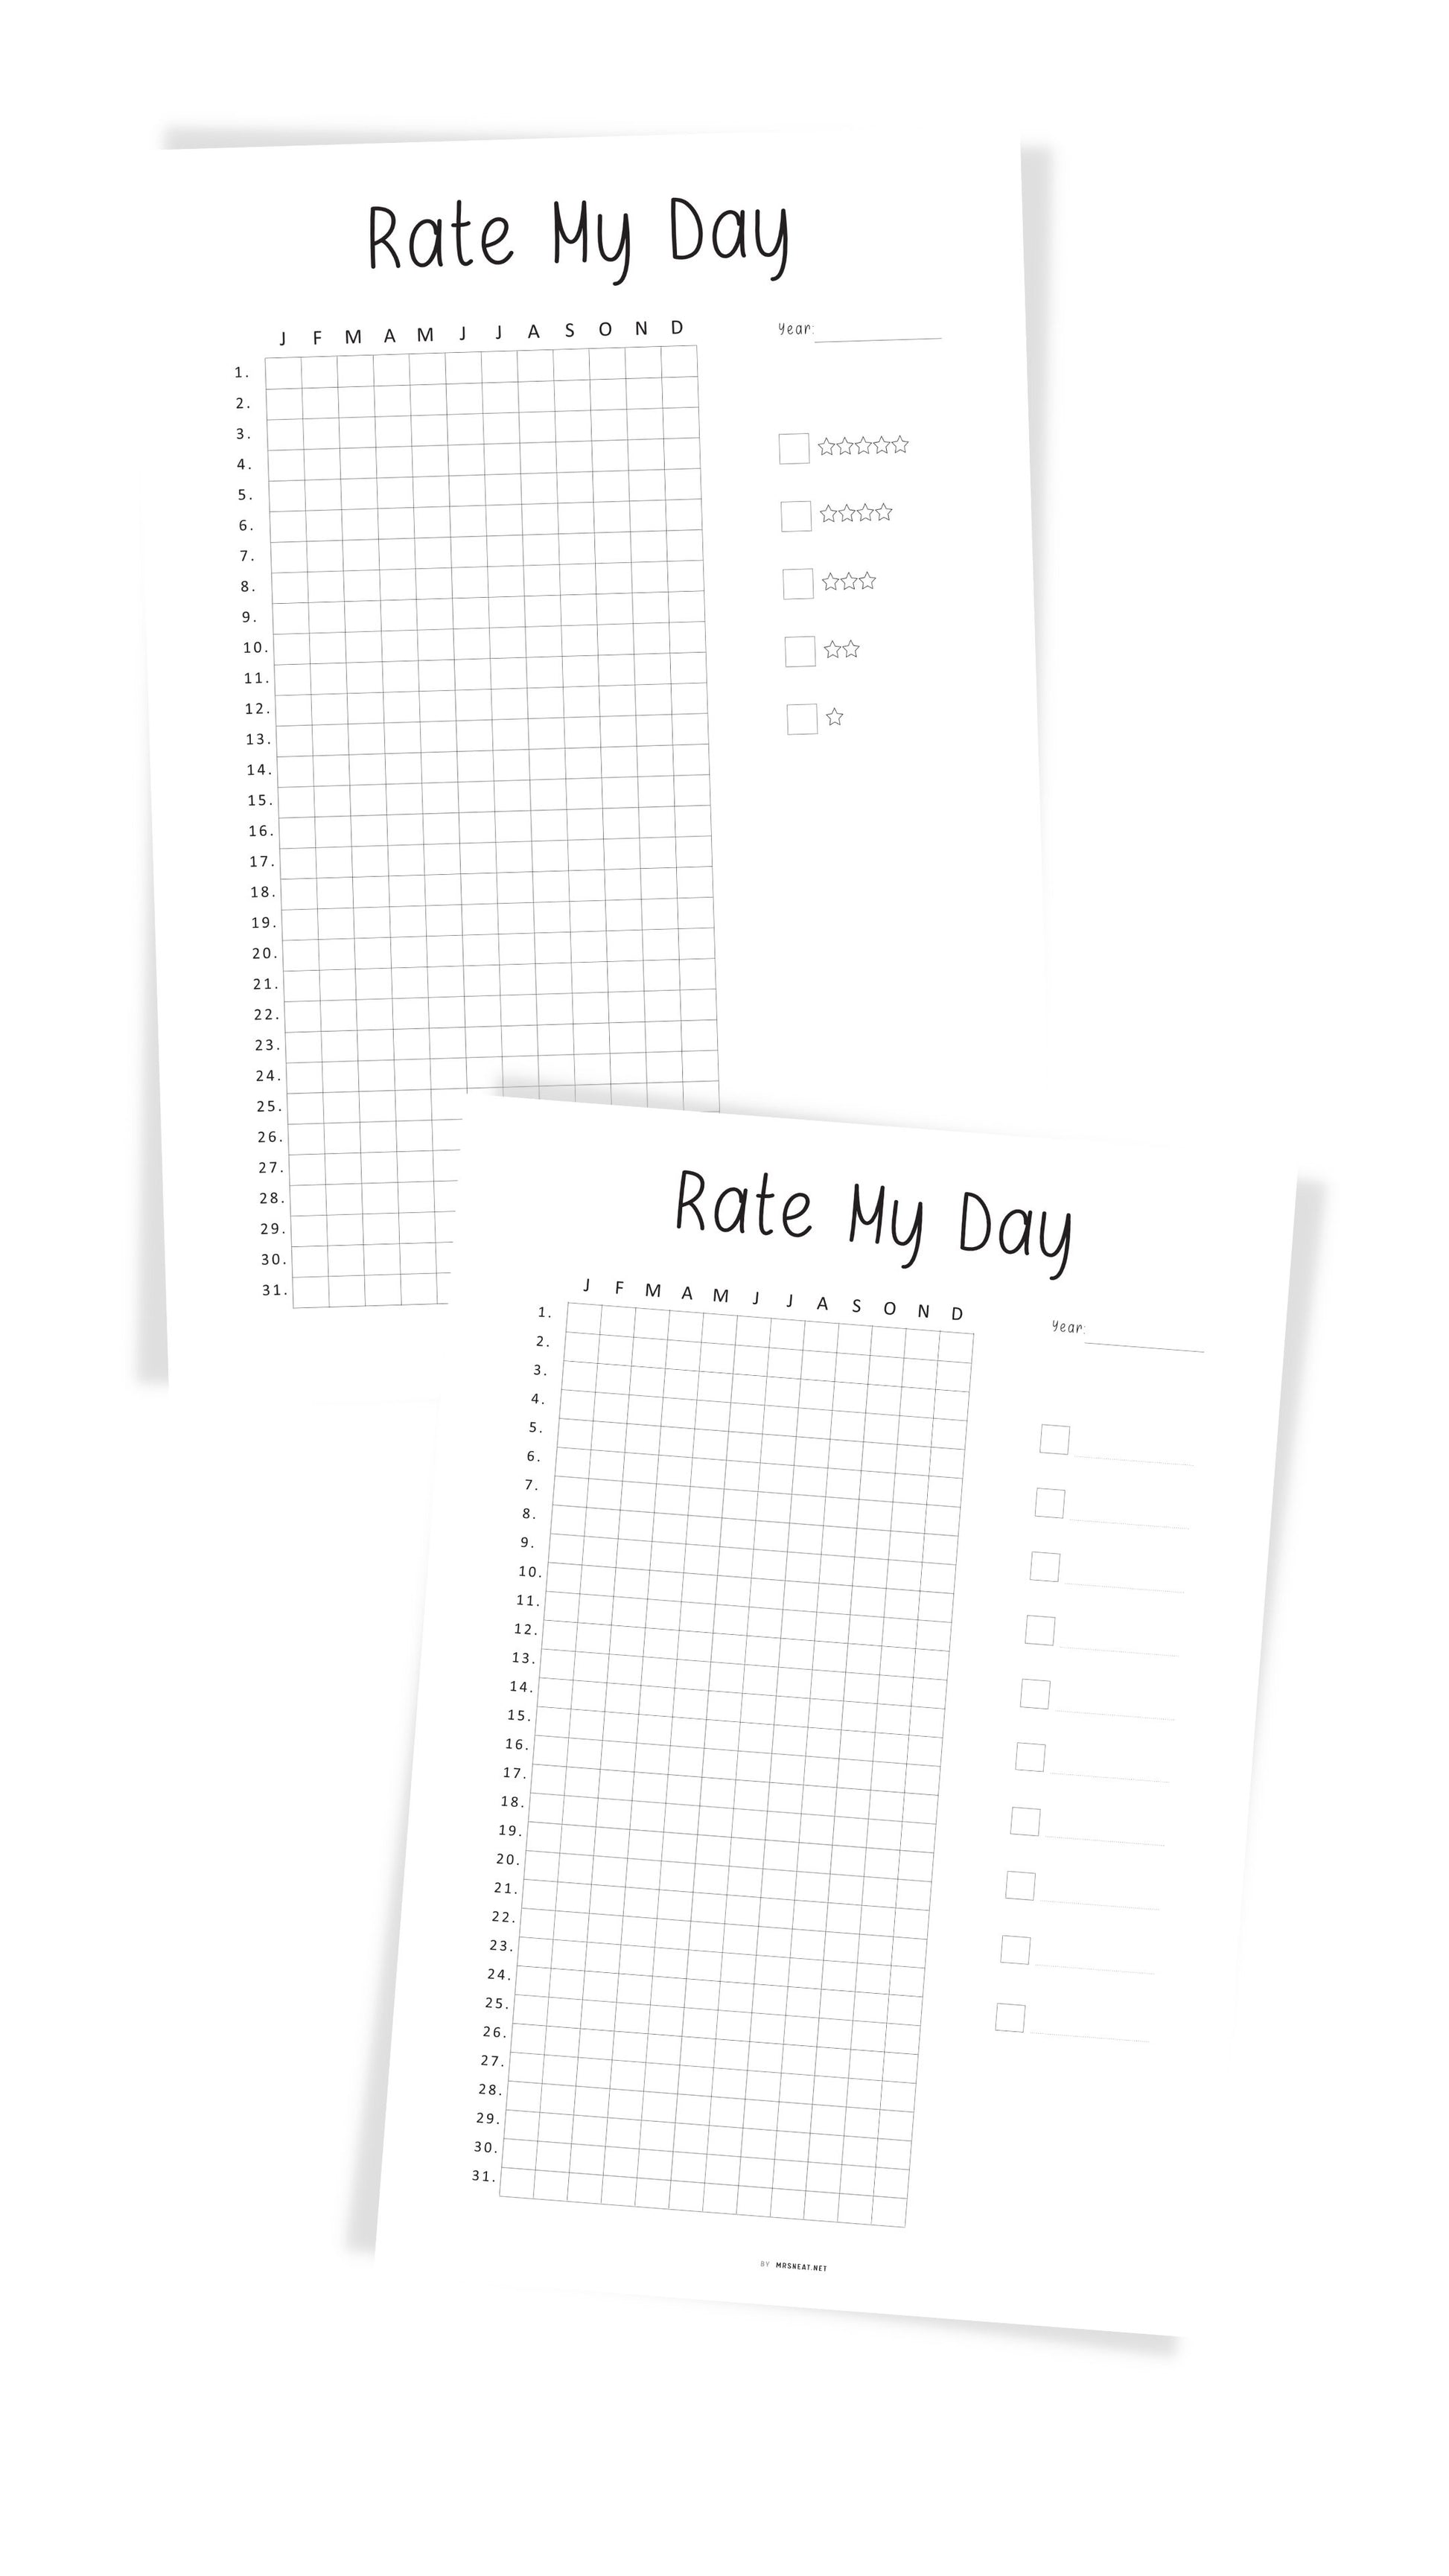 Rate My Day Tracker Printable